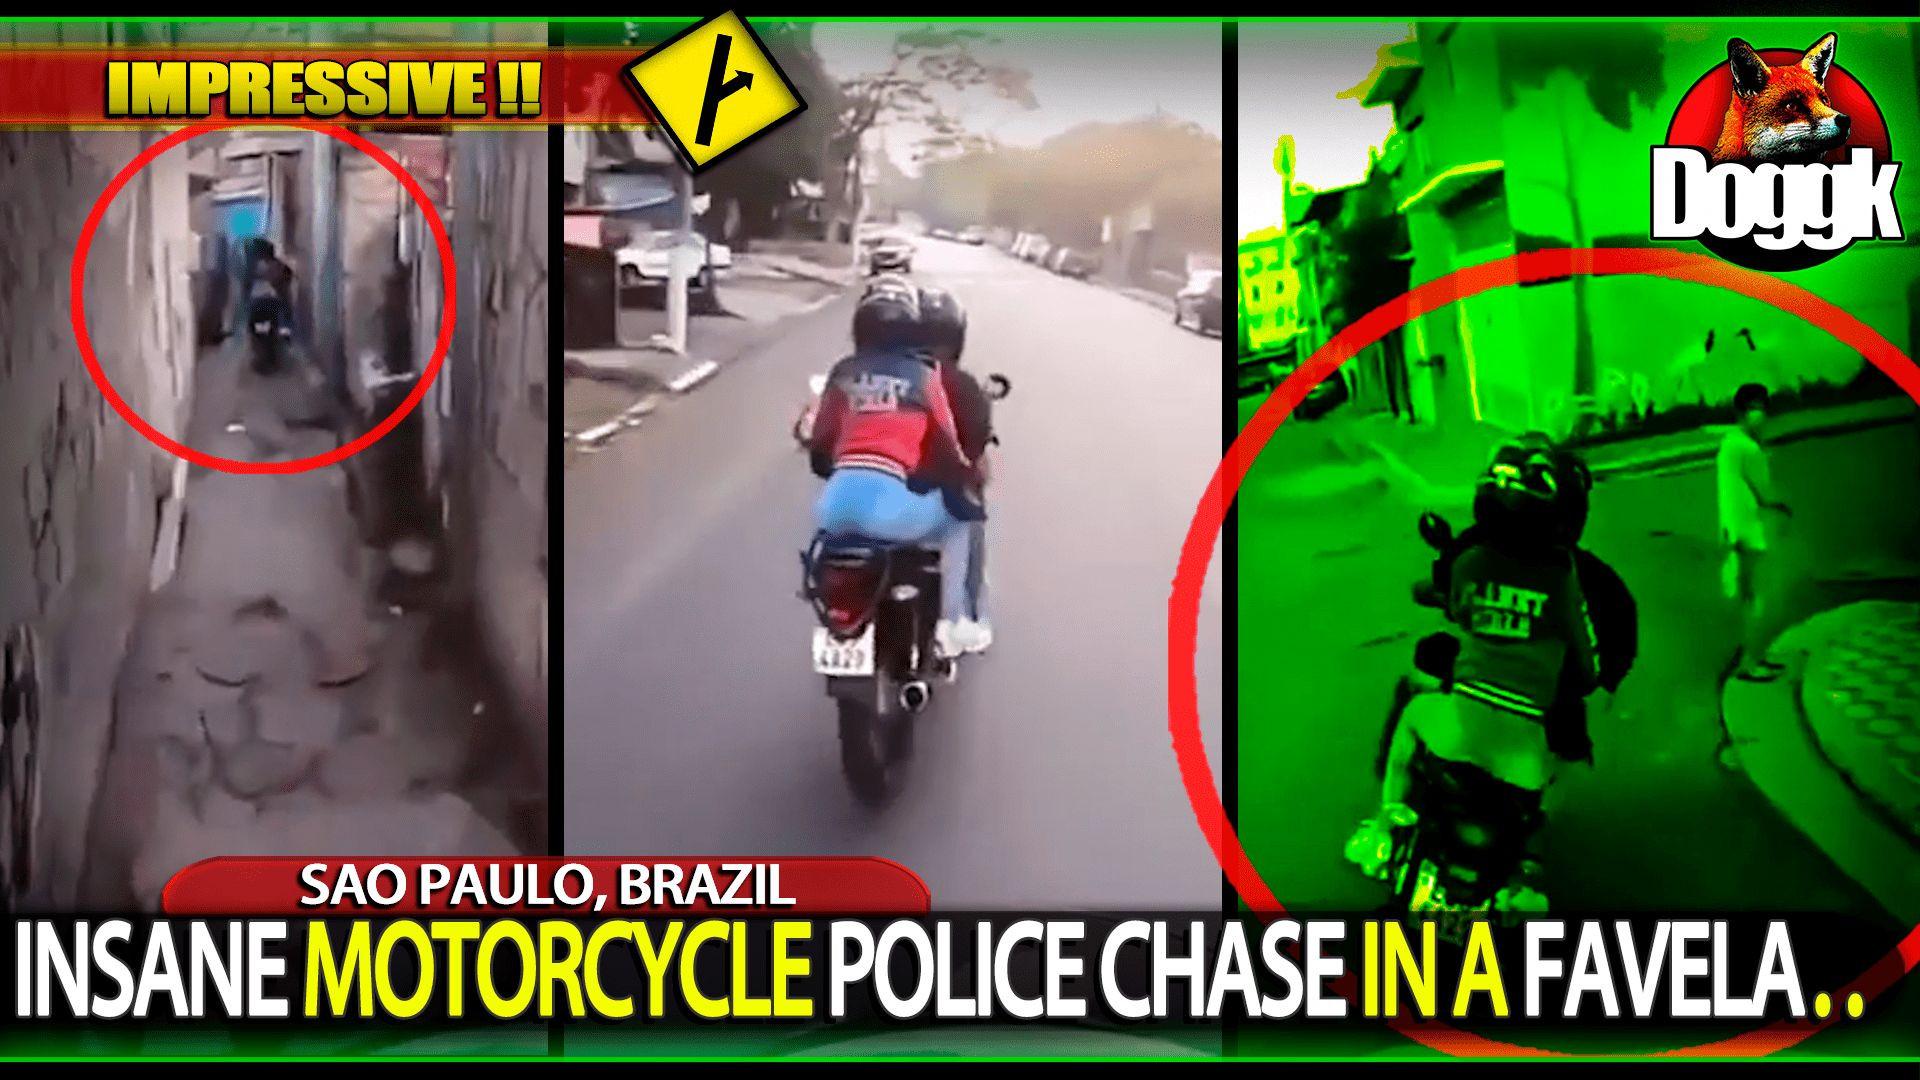 INSANE MOTORCYCLE POLICE CHASE IN A FAVELA.. (SAO PAULO, BRAZIL)